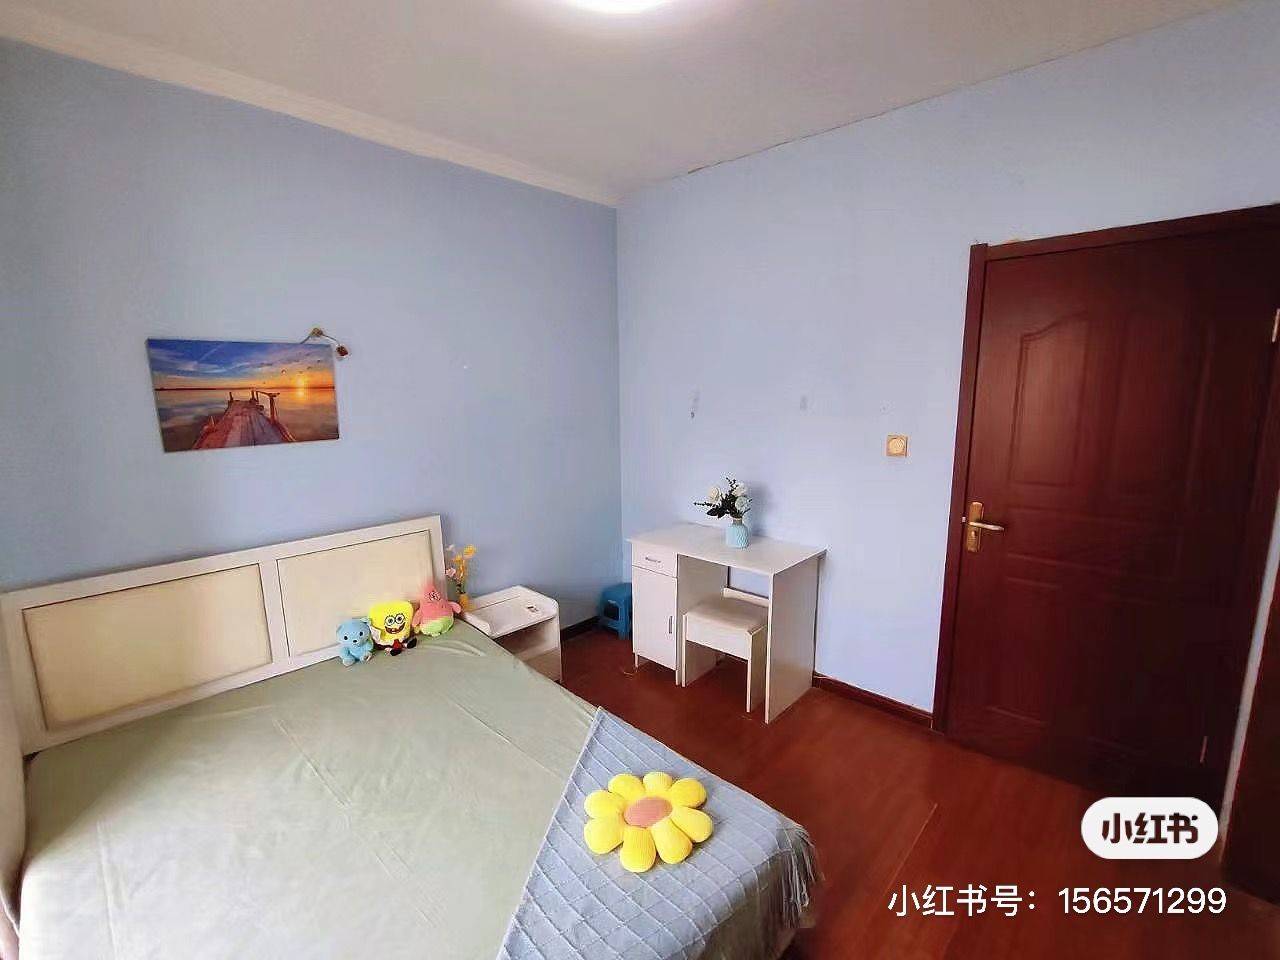 Xi'An-Weiyang-Cozy Home,Clean&Comfy,No Gender Limit,Hustle & Bustle,Chilled,LGBTQ Friendly,Pet Friendly